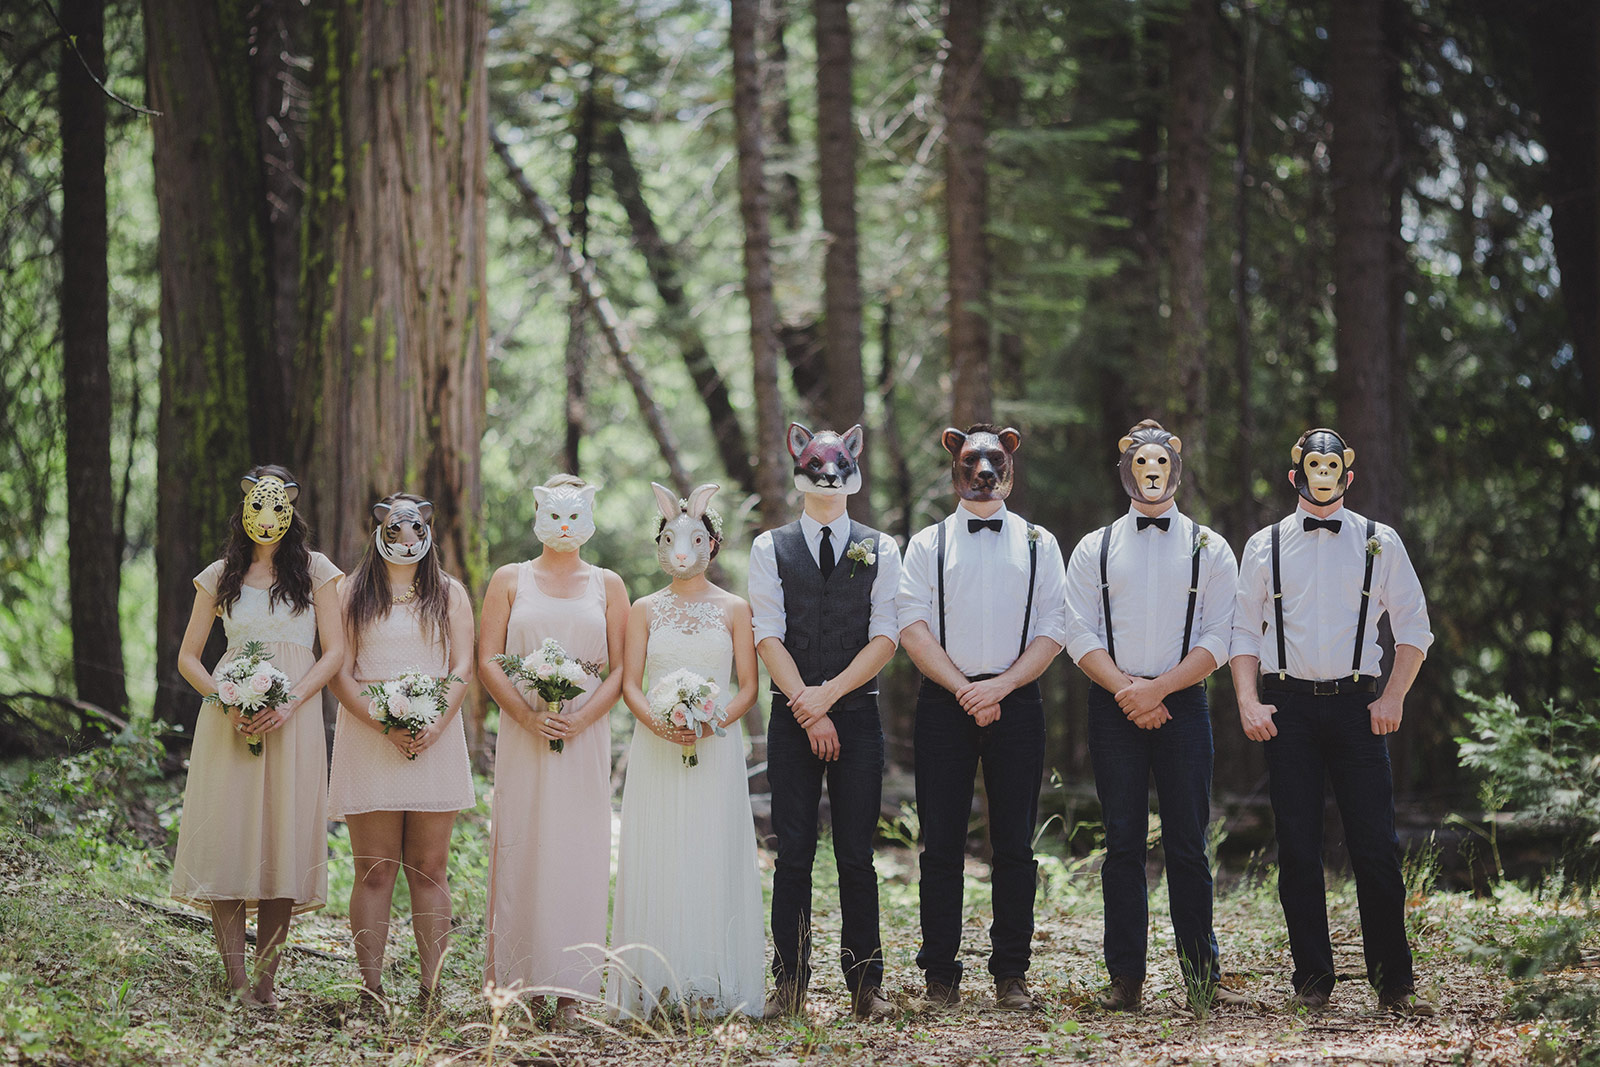 A group of people wearing masks in the woods.